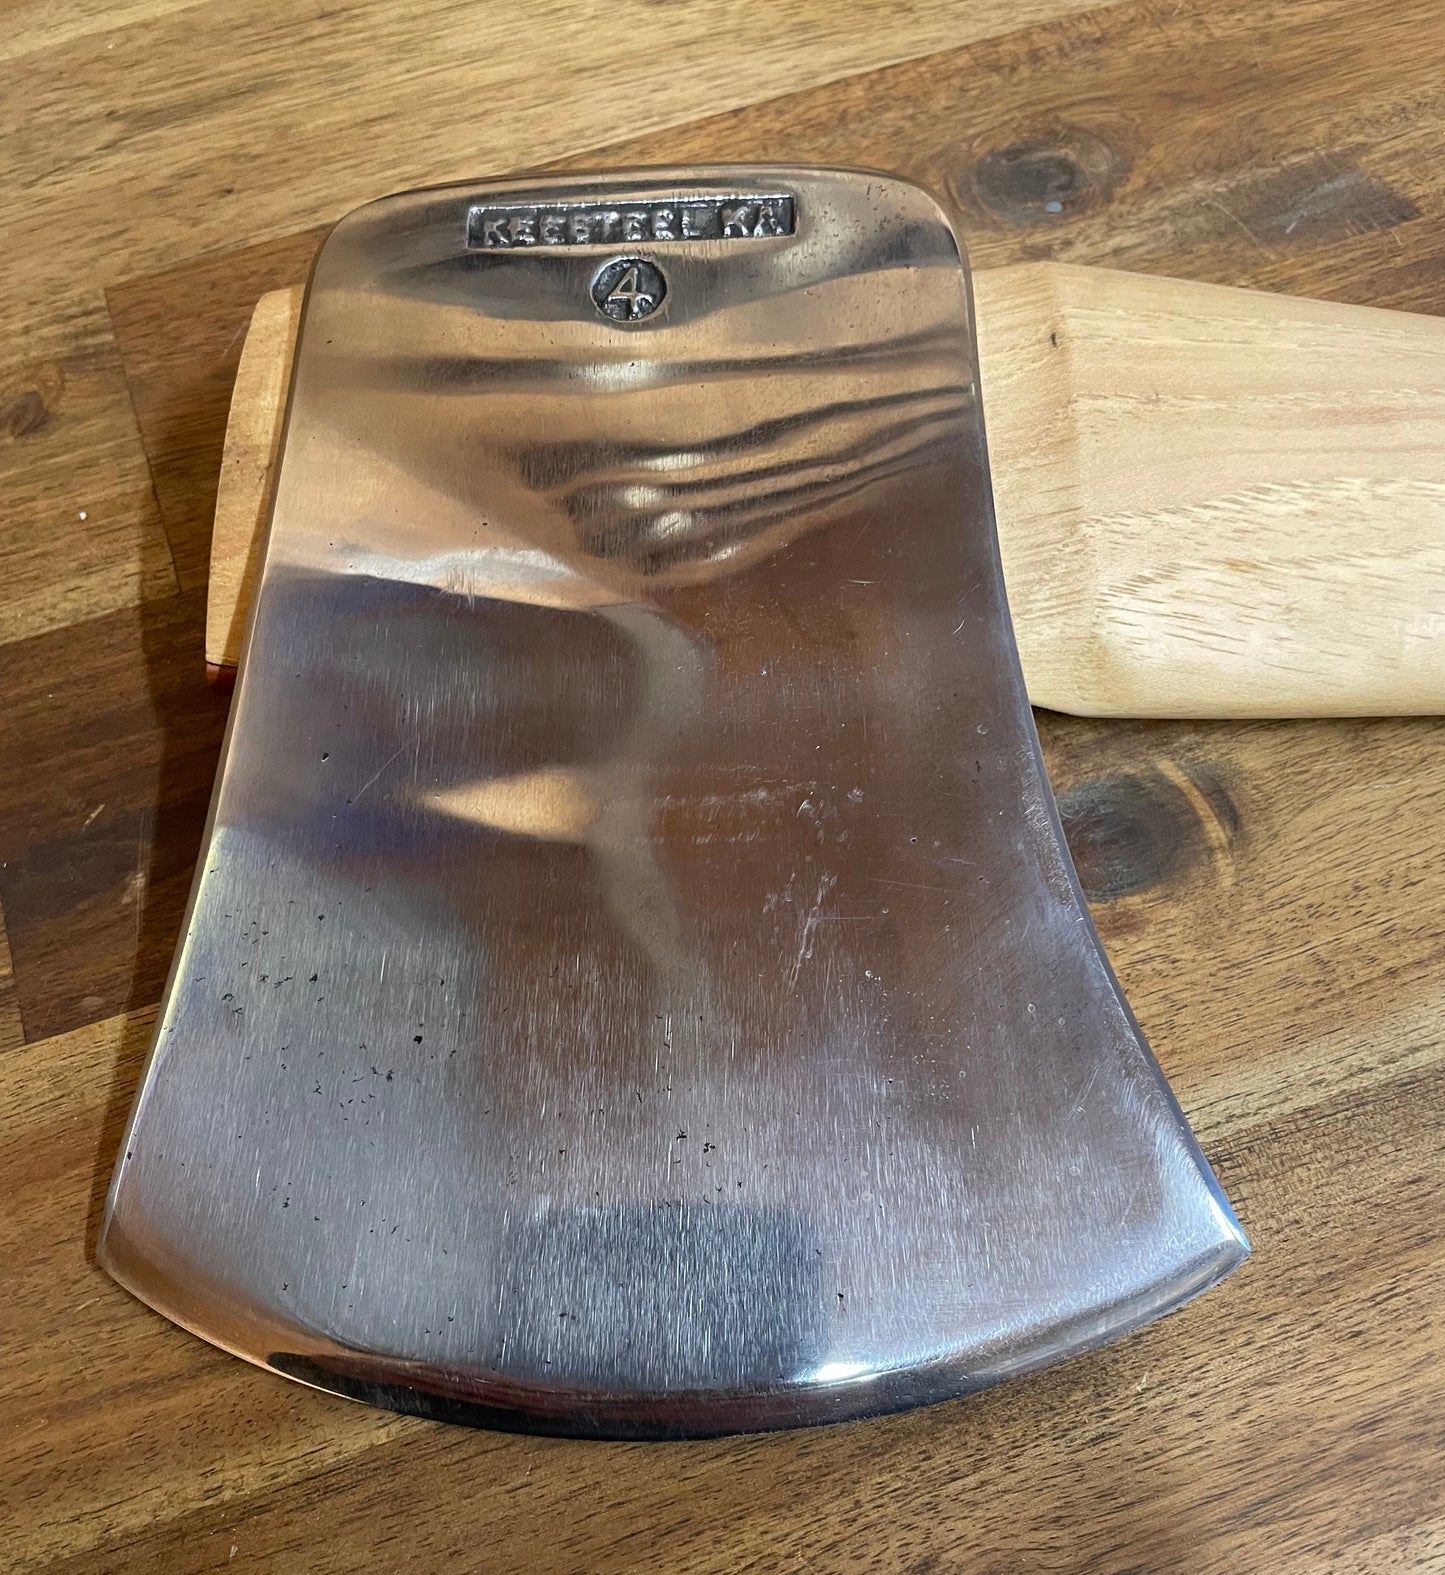 Reconditioned Keesteel Keech 4 lb Axe Hickory Handle  RA067 ++DISCOUNTED++